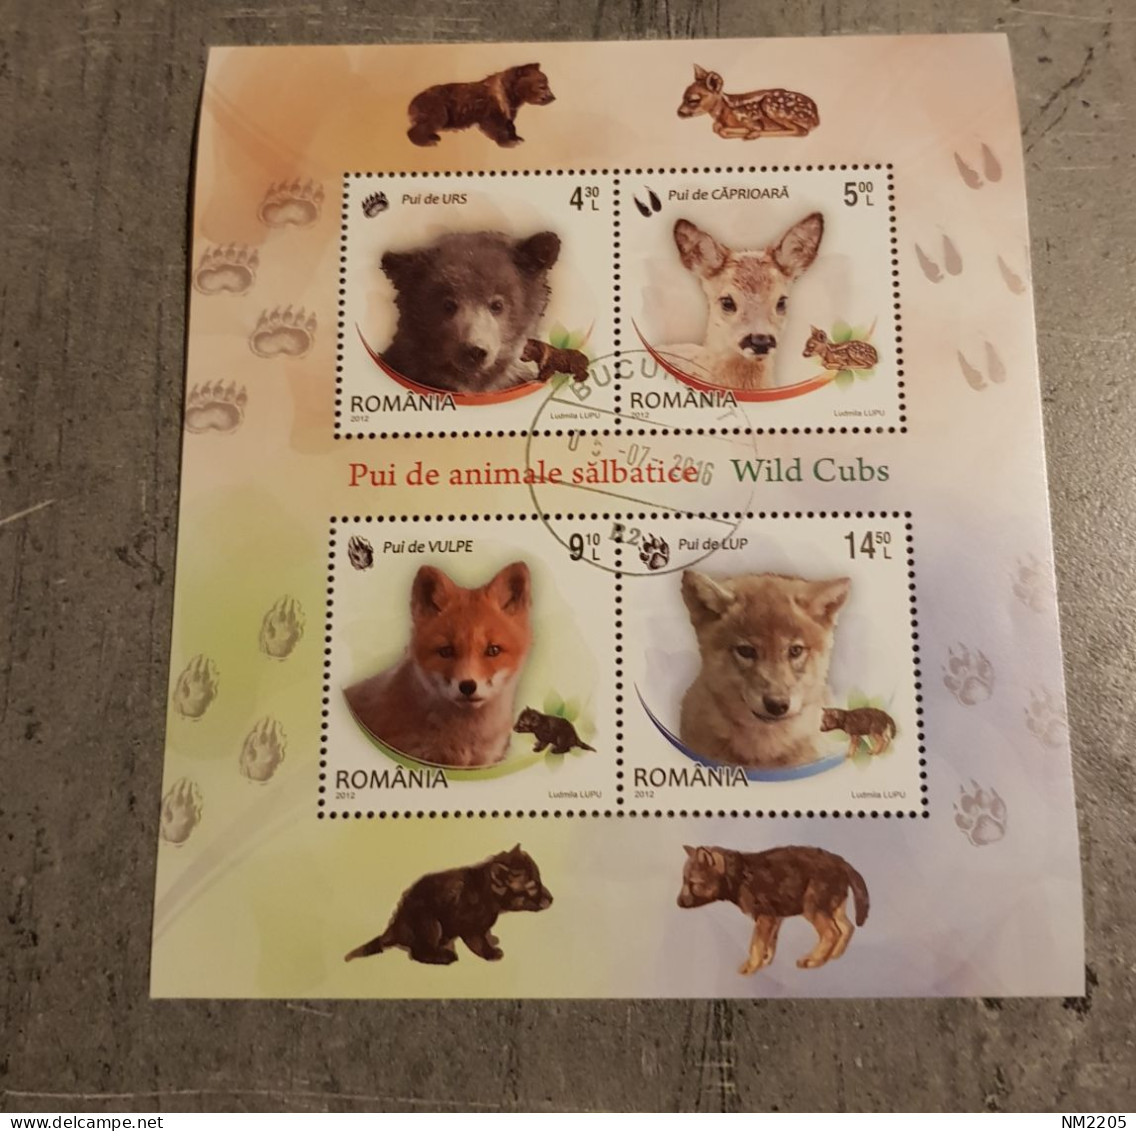 ROMANIA WILD CUBS MINIATURE SHEET USED - Used Stamps